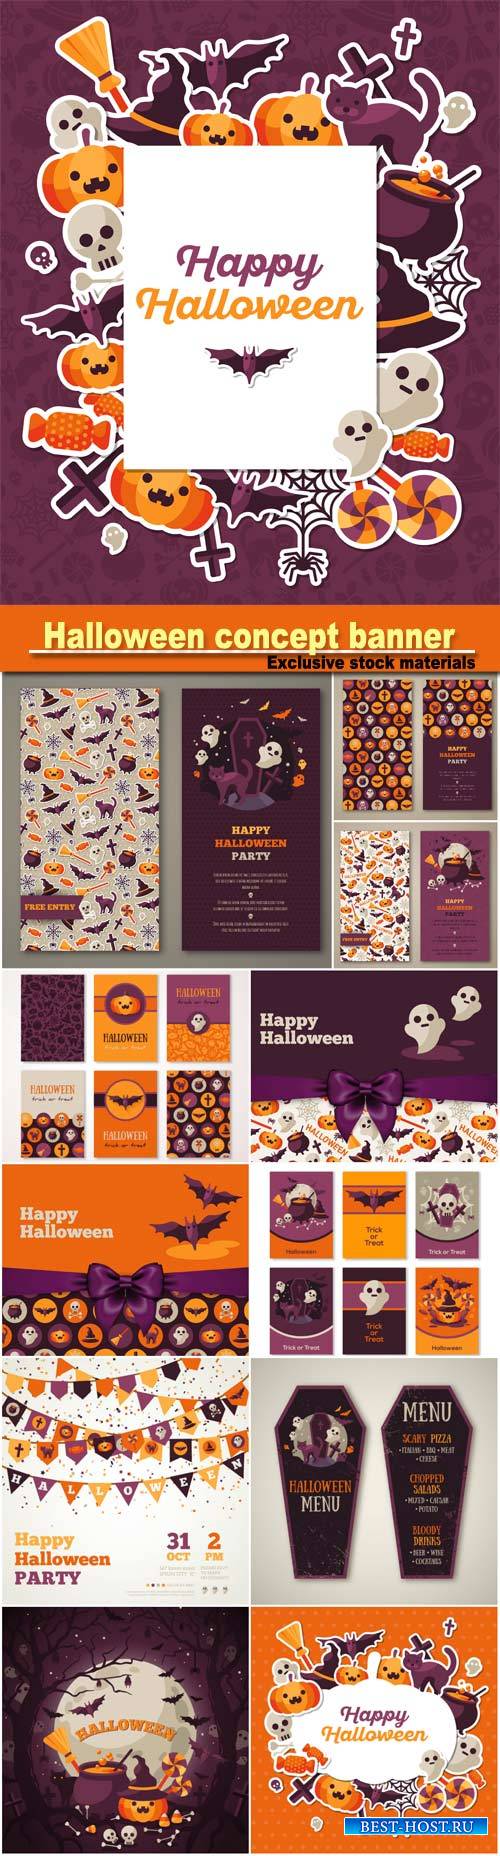 Halloween concept banner with flat Icons stickers